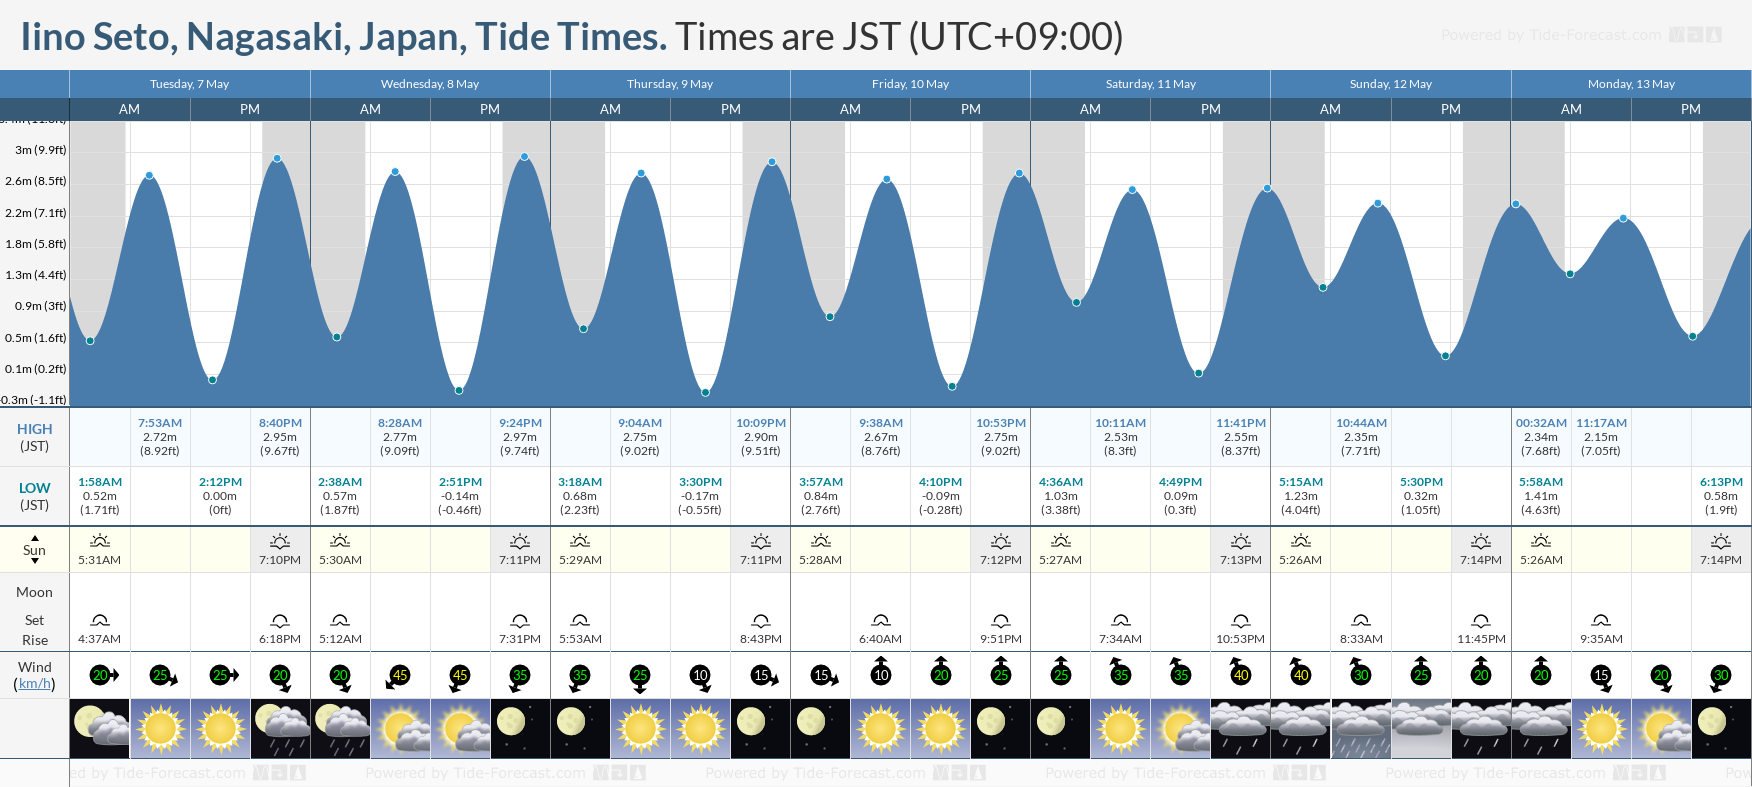 Iino Seto, Nagasaki, Japan Tide Chart including high and low tide tide times for the next 7 days